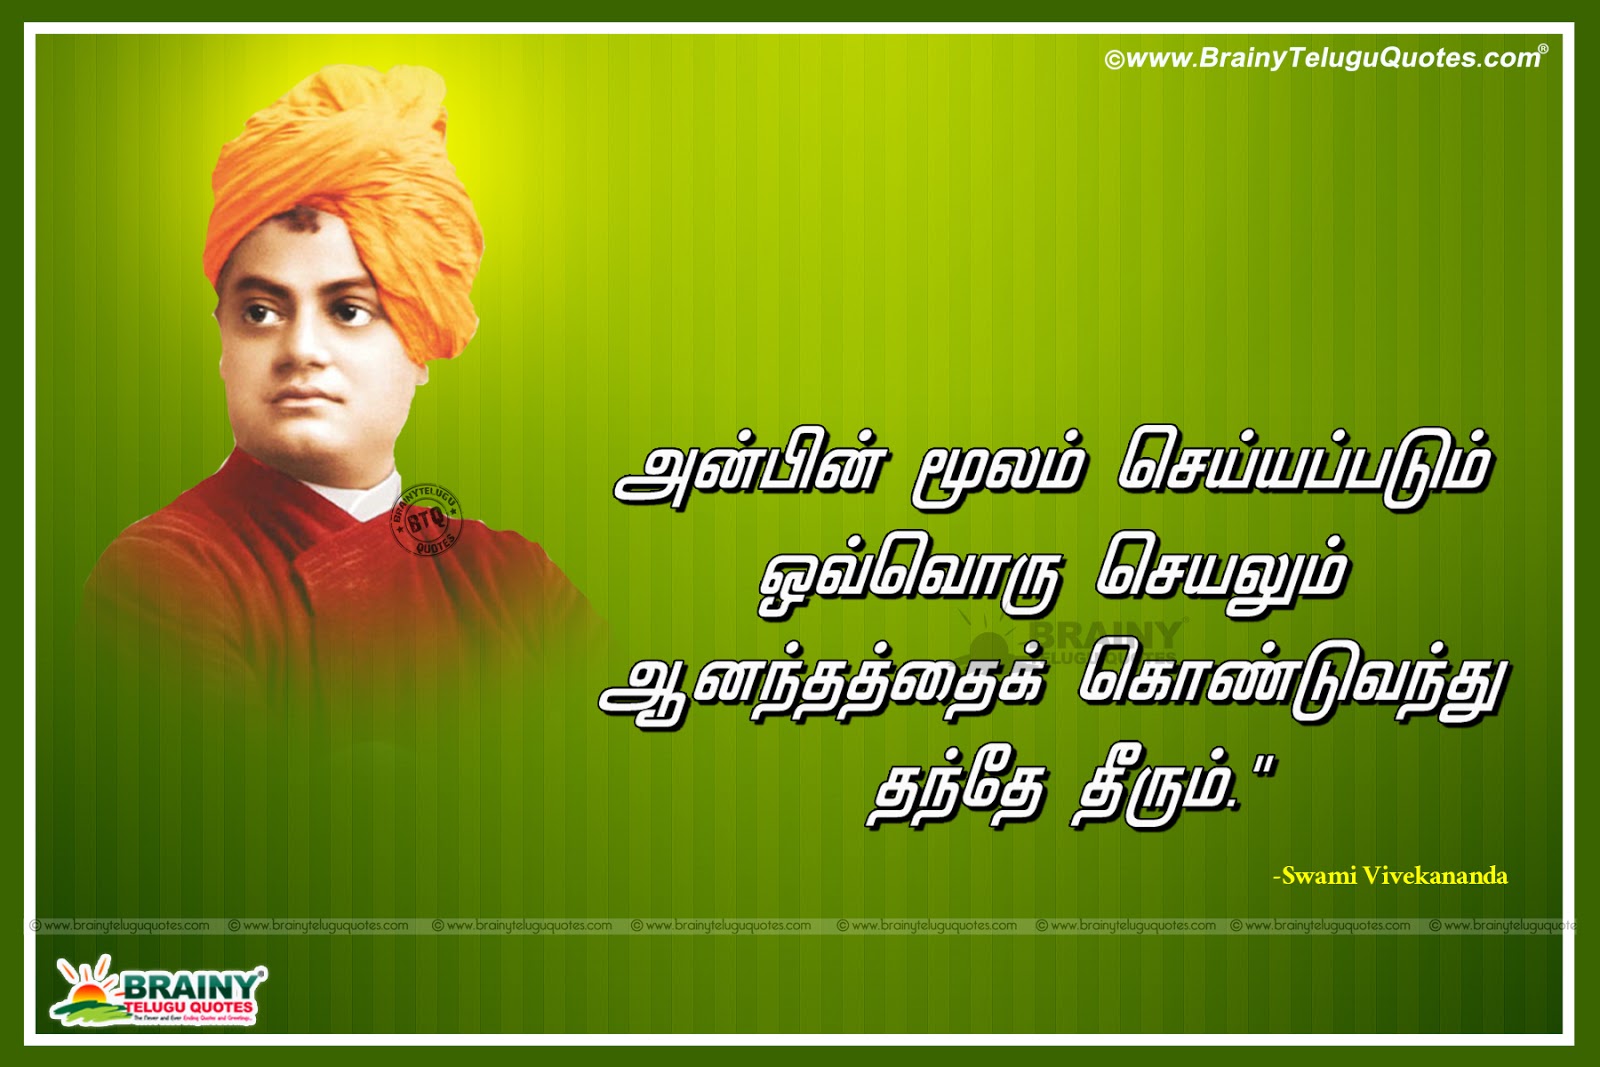 Swami Vivekananda Inspirational Quotes with hd wallpapers in Tamil